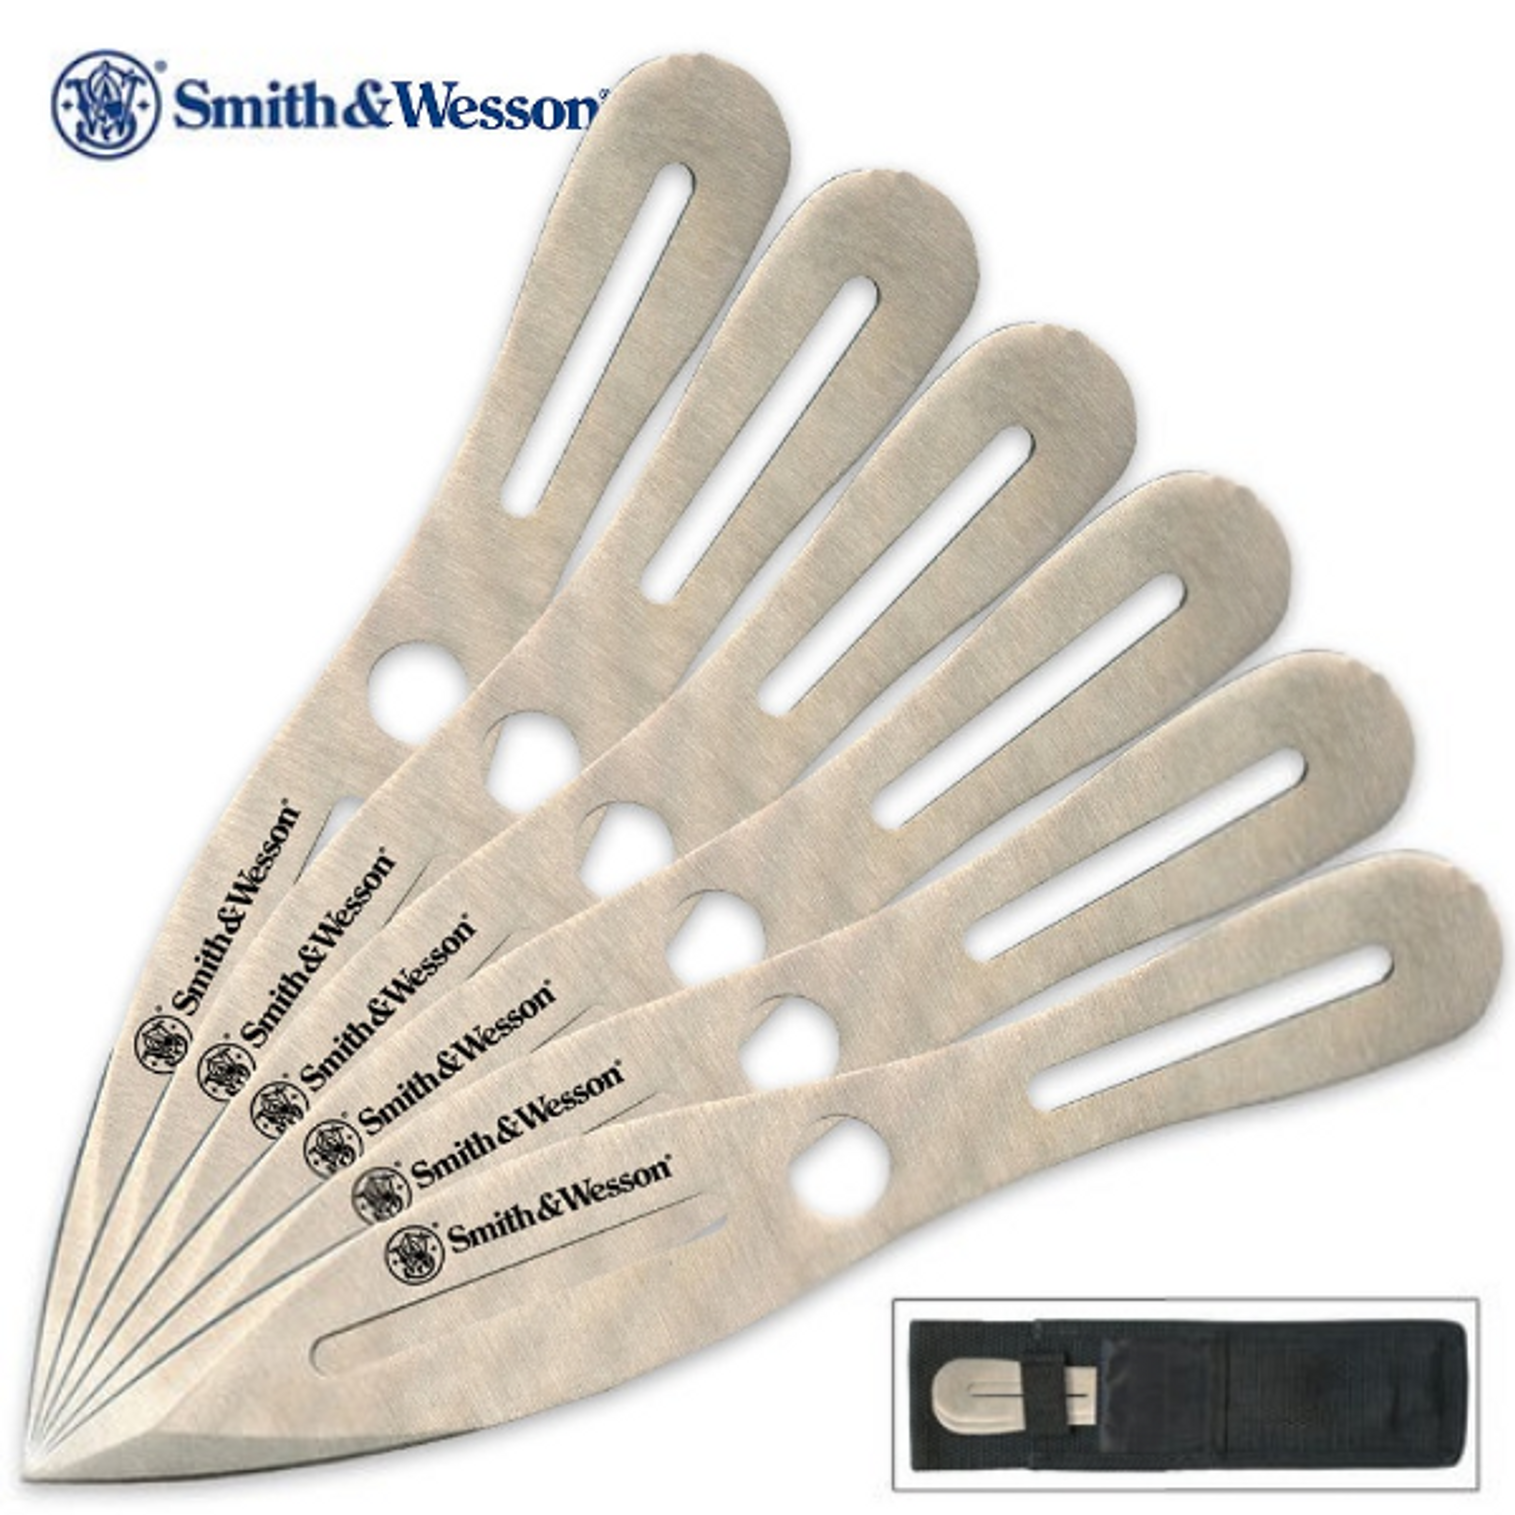 Smith & Wesson Throwing Knives 8in - 6-Pack